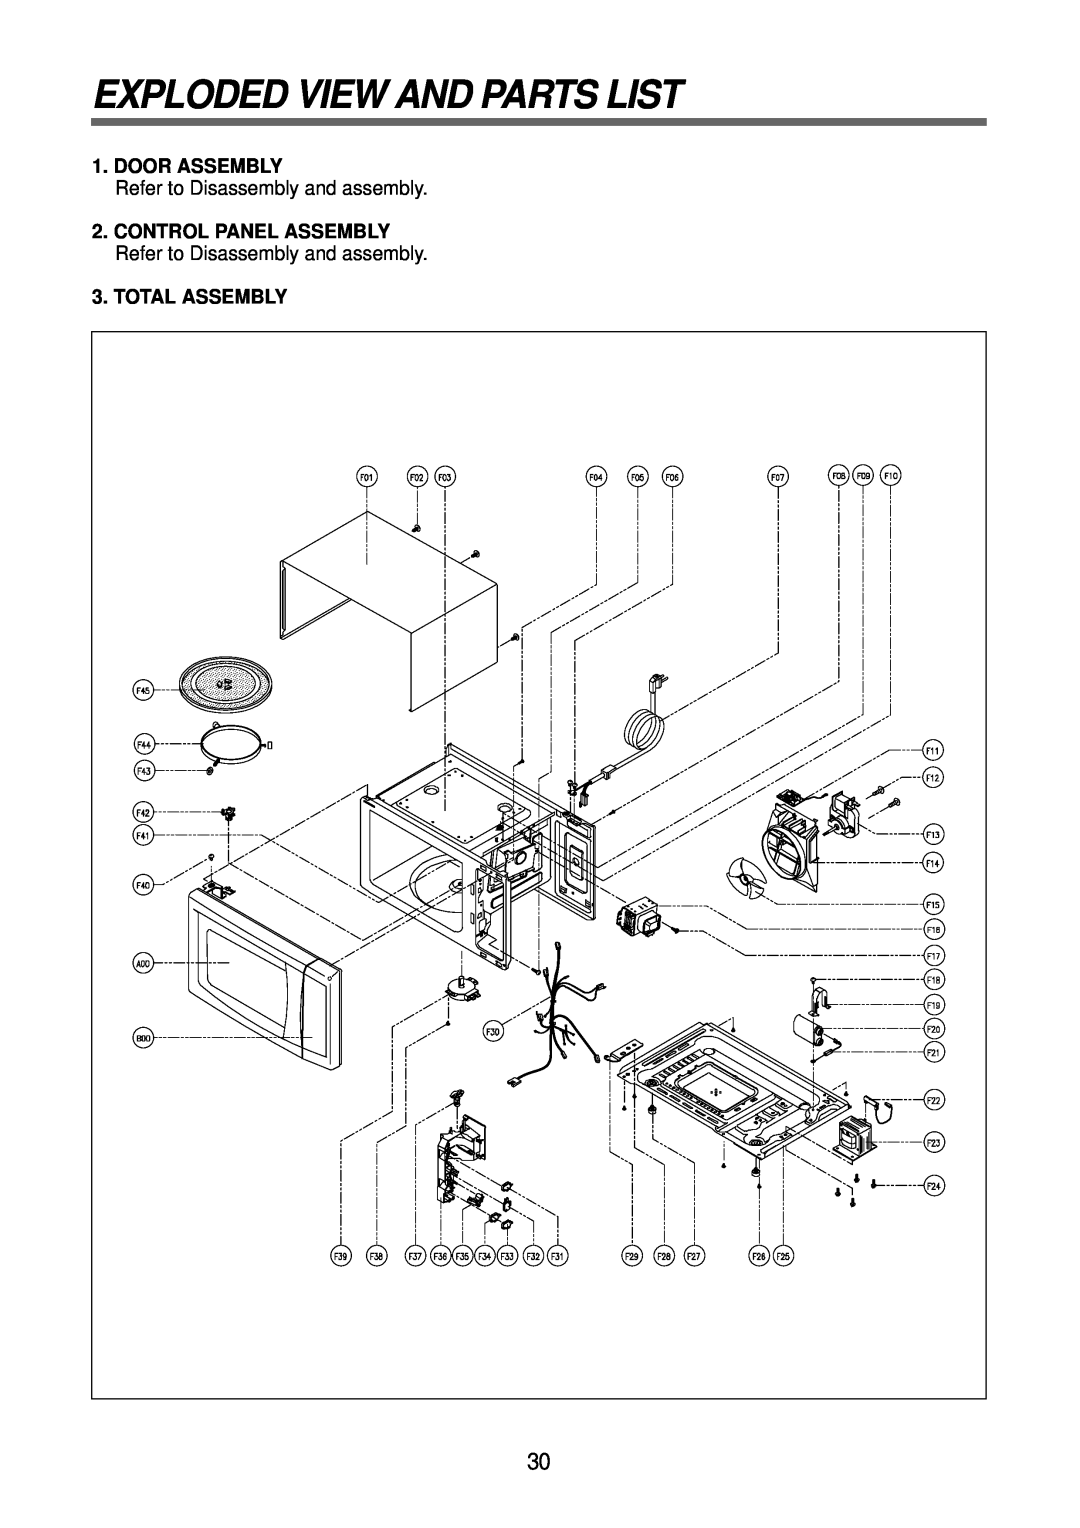 Daewoo KOR-6Q2B5S Exploded View And Parts List, Door Assembly, Refer to Disassembly and assembly, Total Assembly 